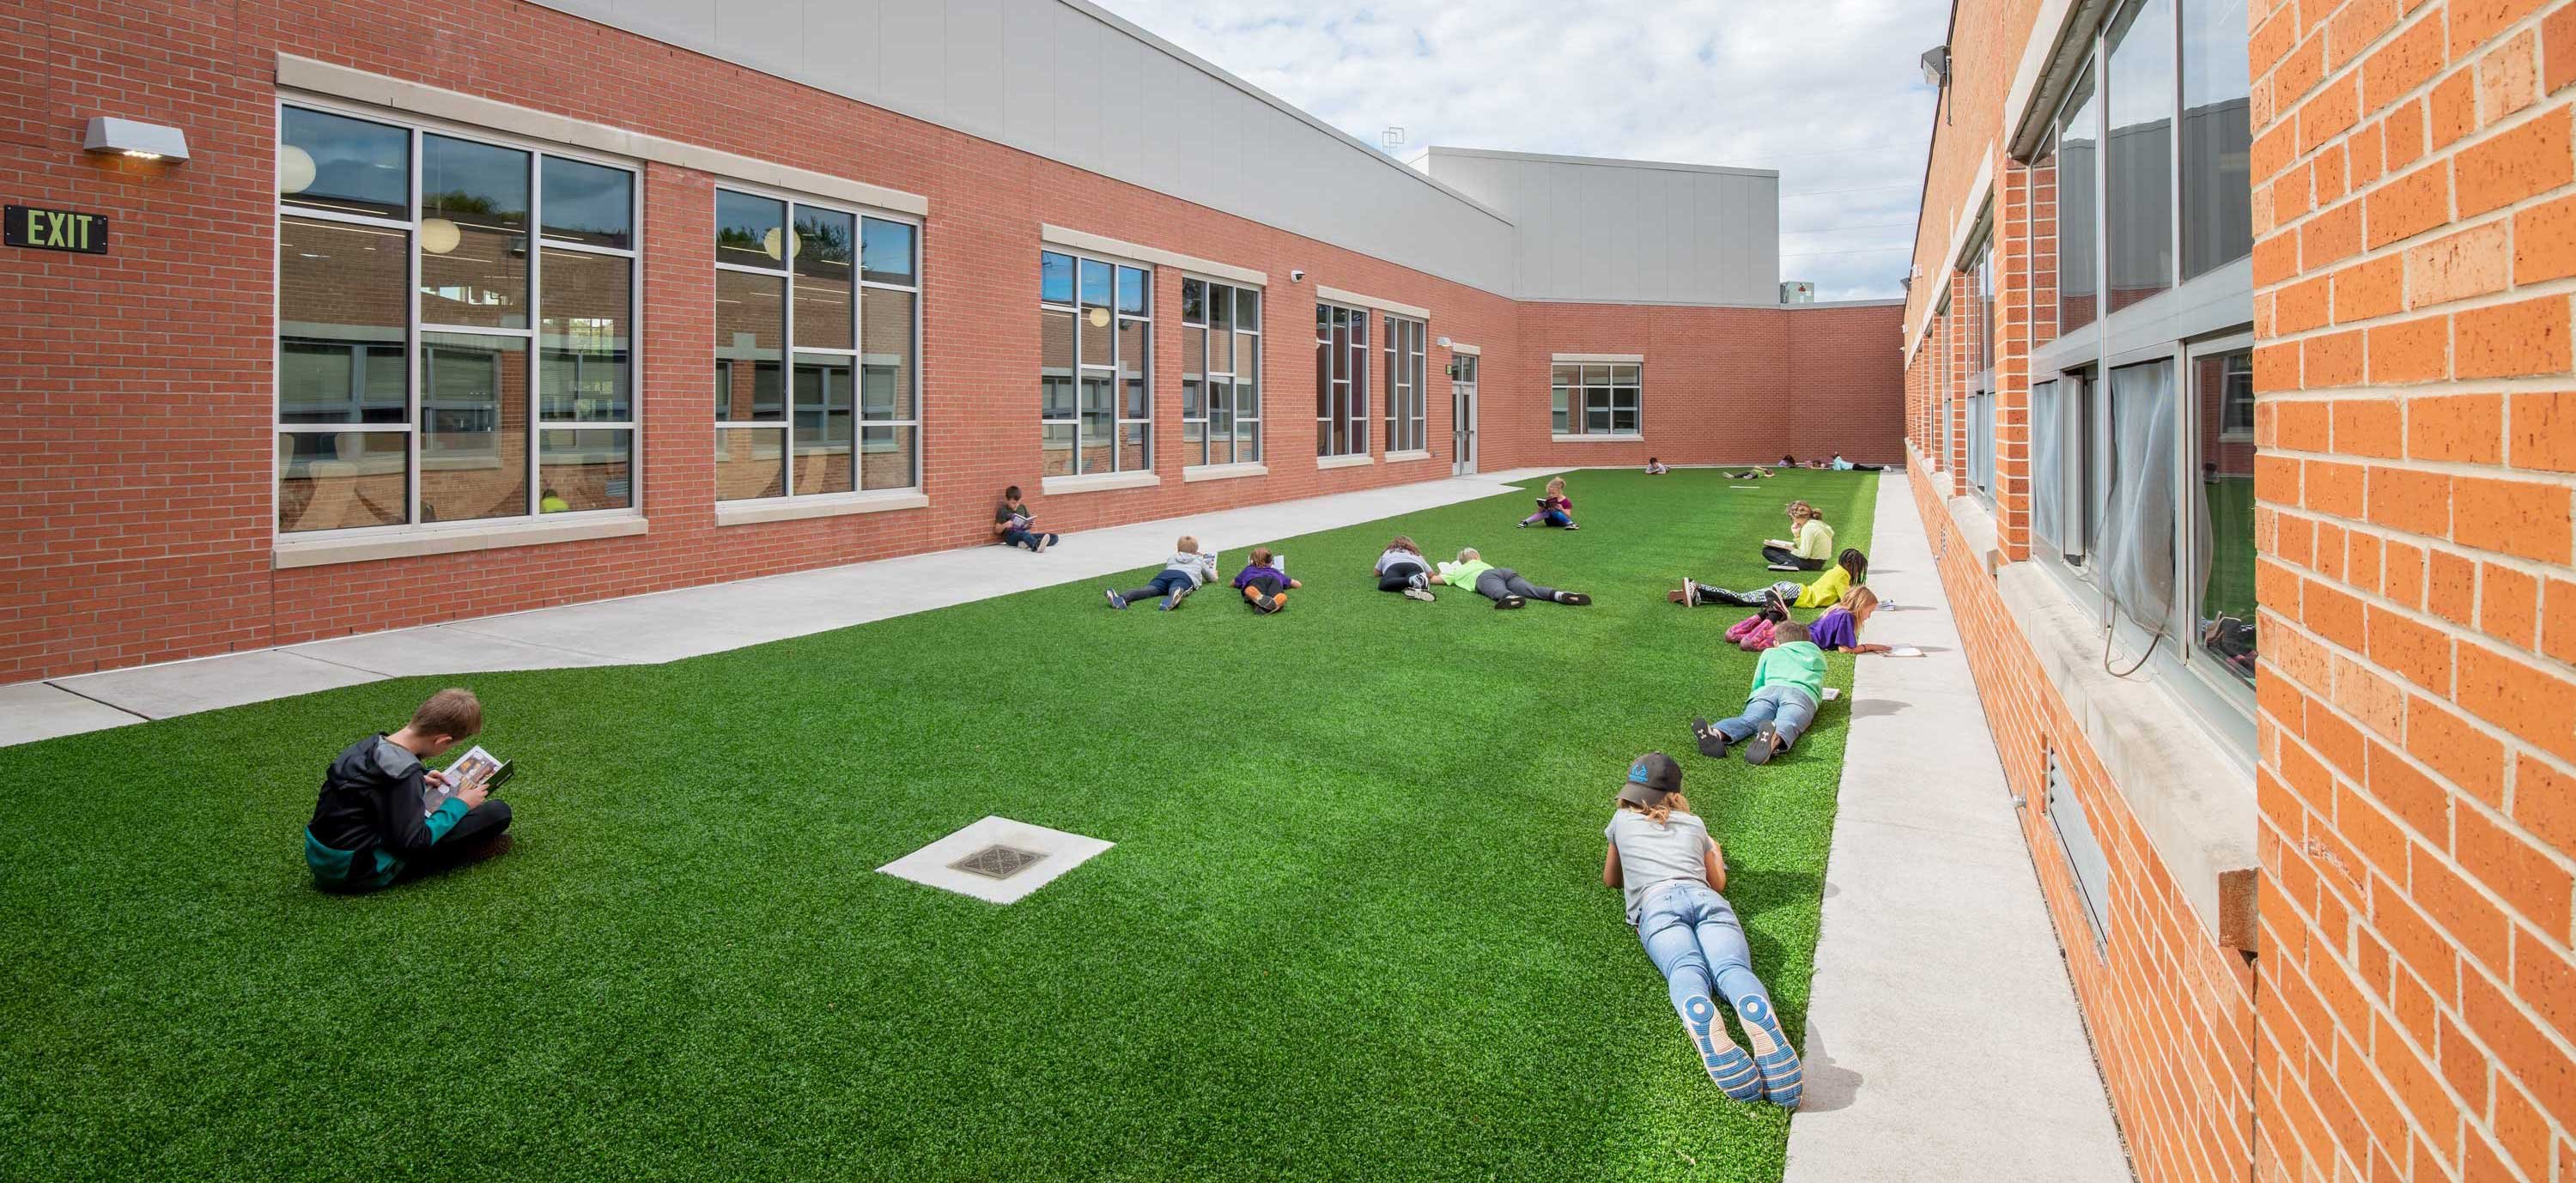 Modern School Building C.D. Smith Construction Manager & Preconstruction Marinette Intermediate School Addition Renovation Project turf courtyard